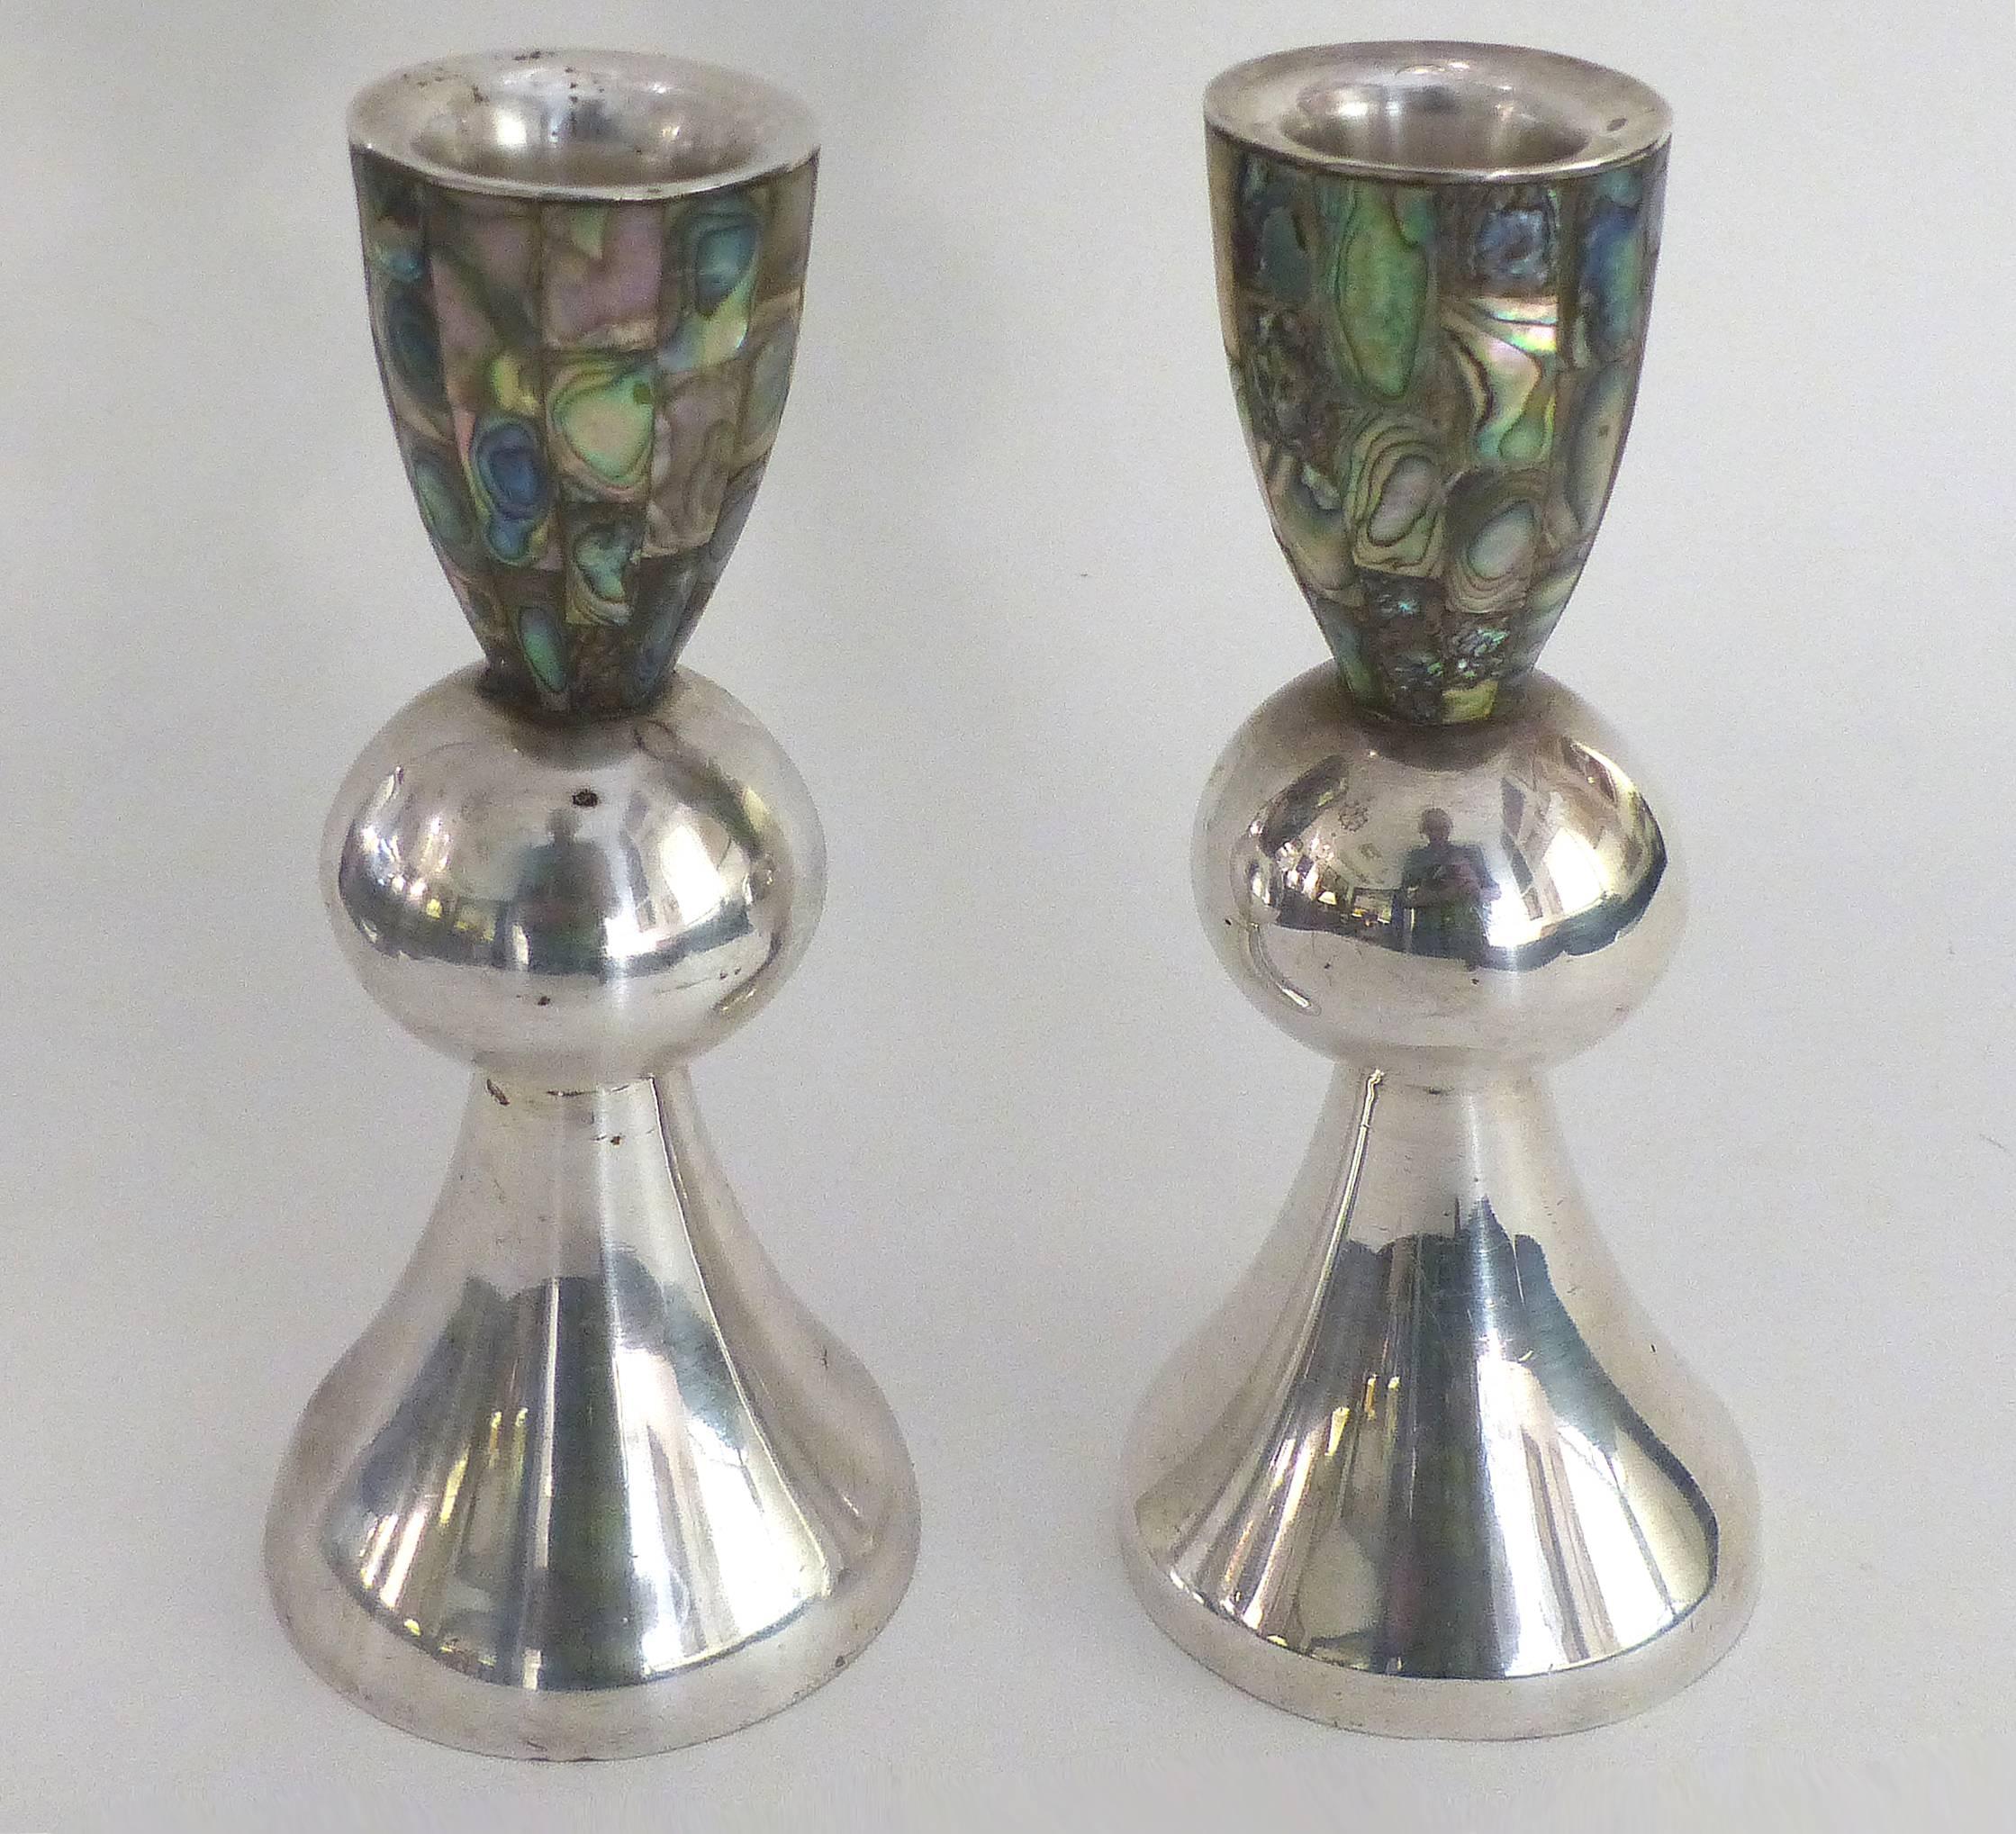 Los Castillo 'Taxco, Mexico' Silver Plate and Abalone Candleholders, Pair

Offered for sale is a pair of silver plated and abalone candlesticks from the renowned workshops of Los Castillo in Taxco, Mexico. Each candle holder is fully marked with two